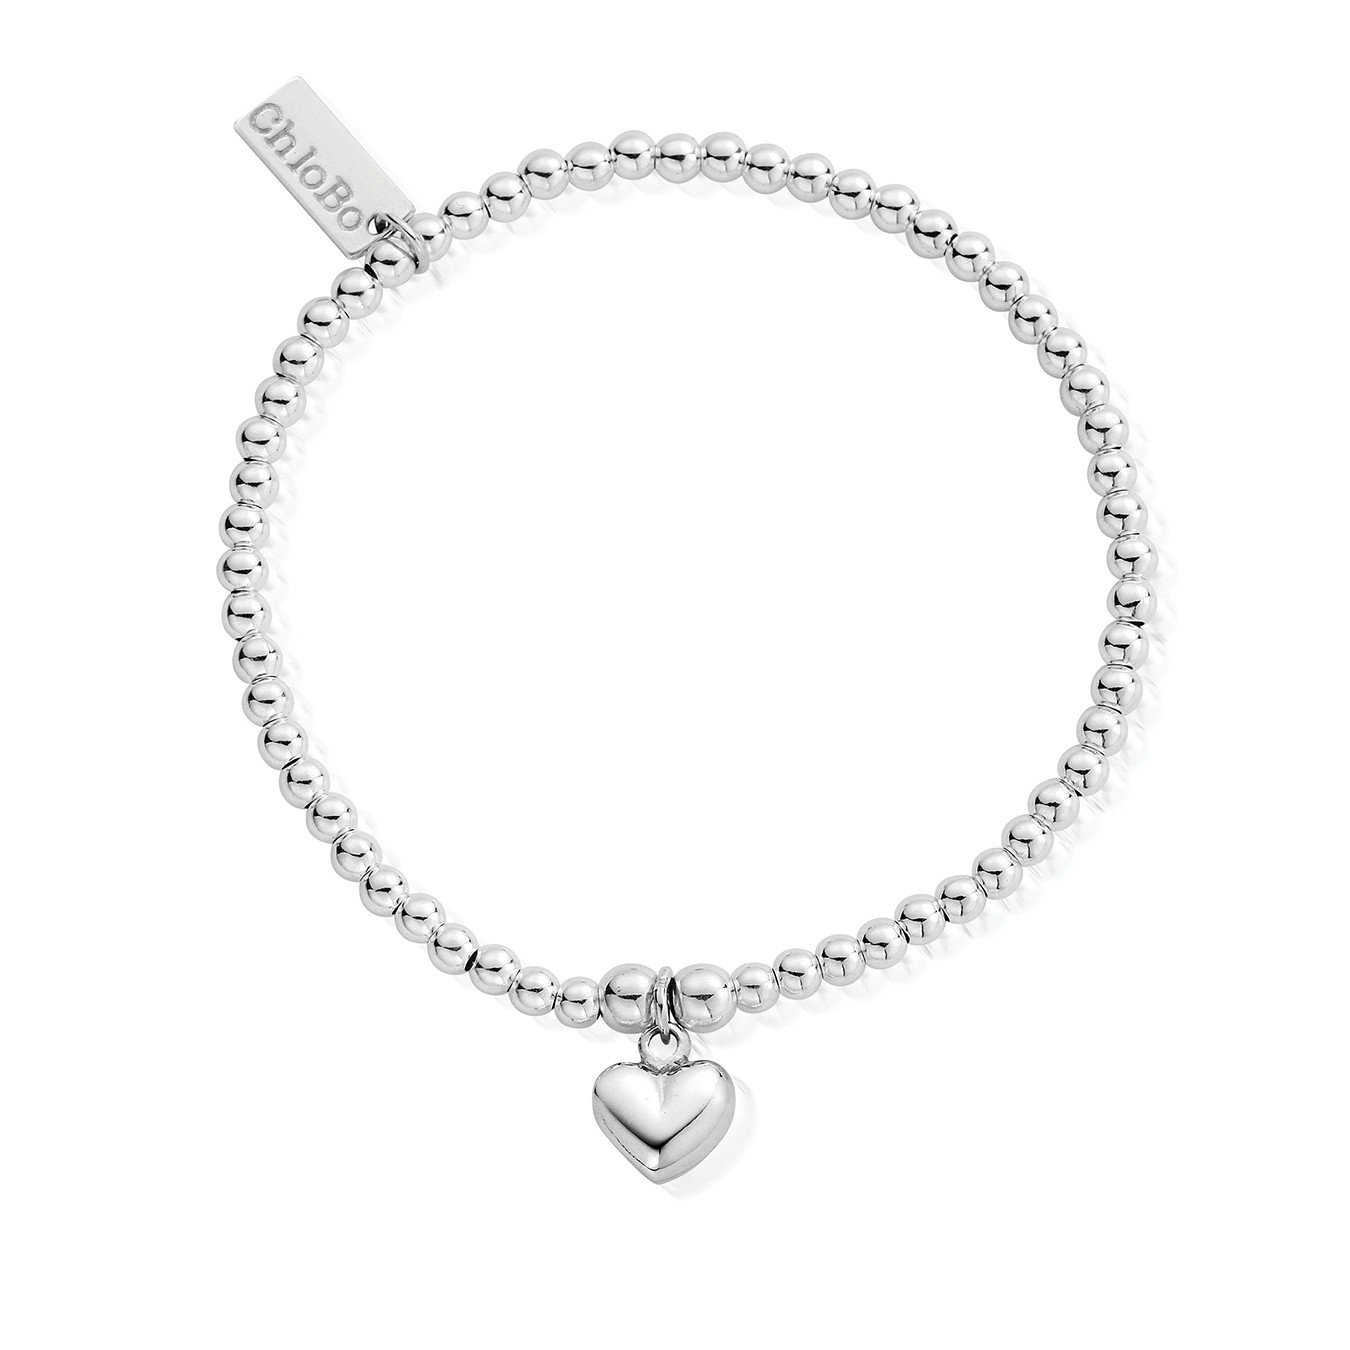 Chlobo - Sterling Silver Puffed Heart Bracelet - SBCC023 | Guest and ...